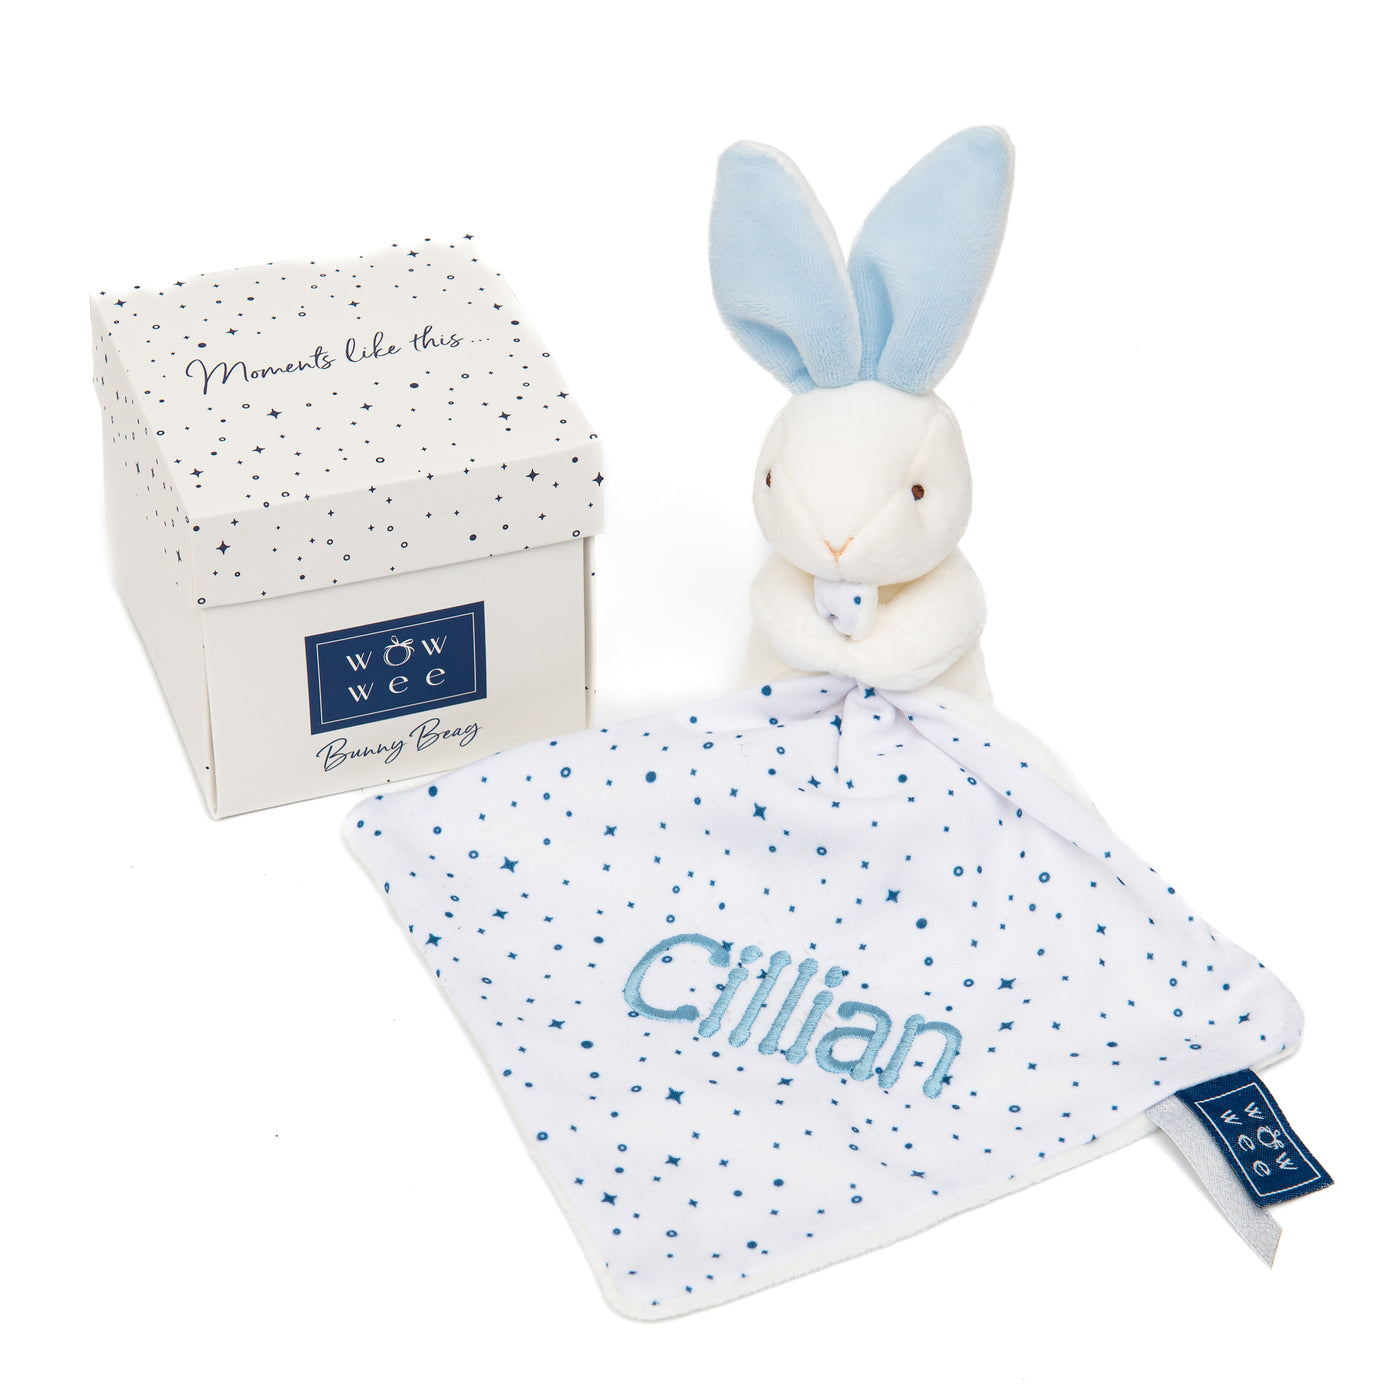 Personalised Deluxe Baby Bundle - Luxurious Gifts for Mama & Baby Boy